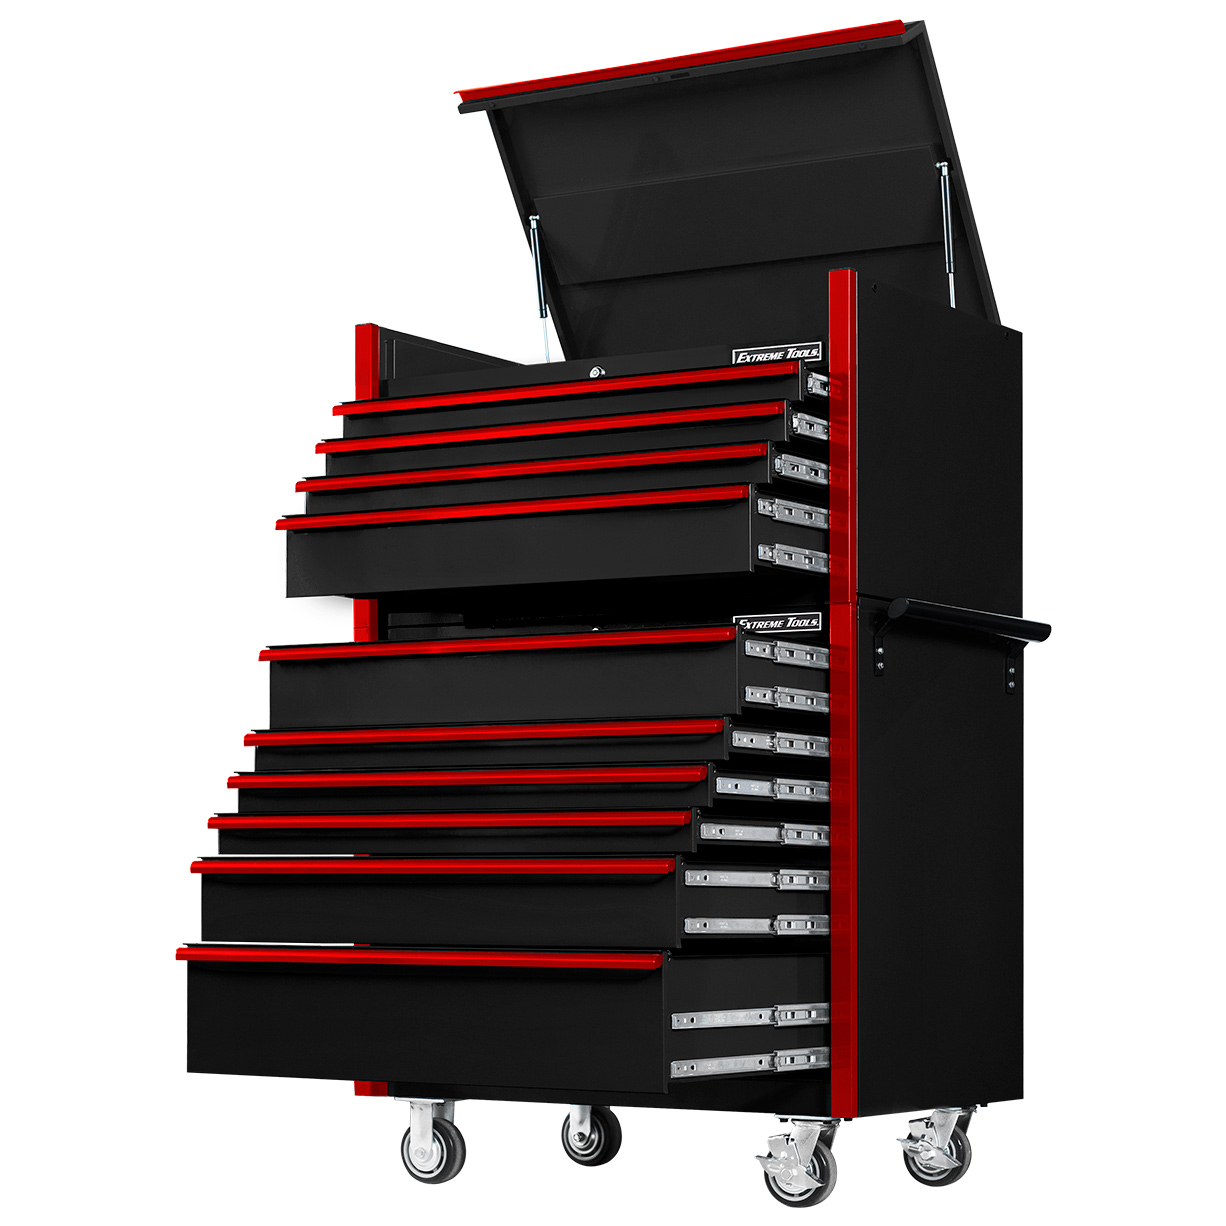 Extreme Tools Gw722512Chbkr 72in 12-Drawer Top Chest, Black-Red Handles